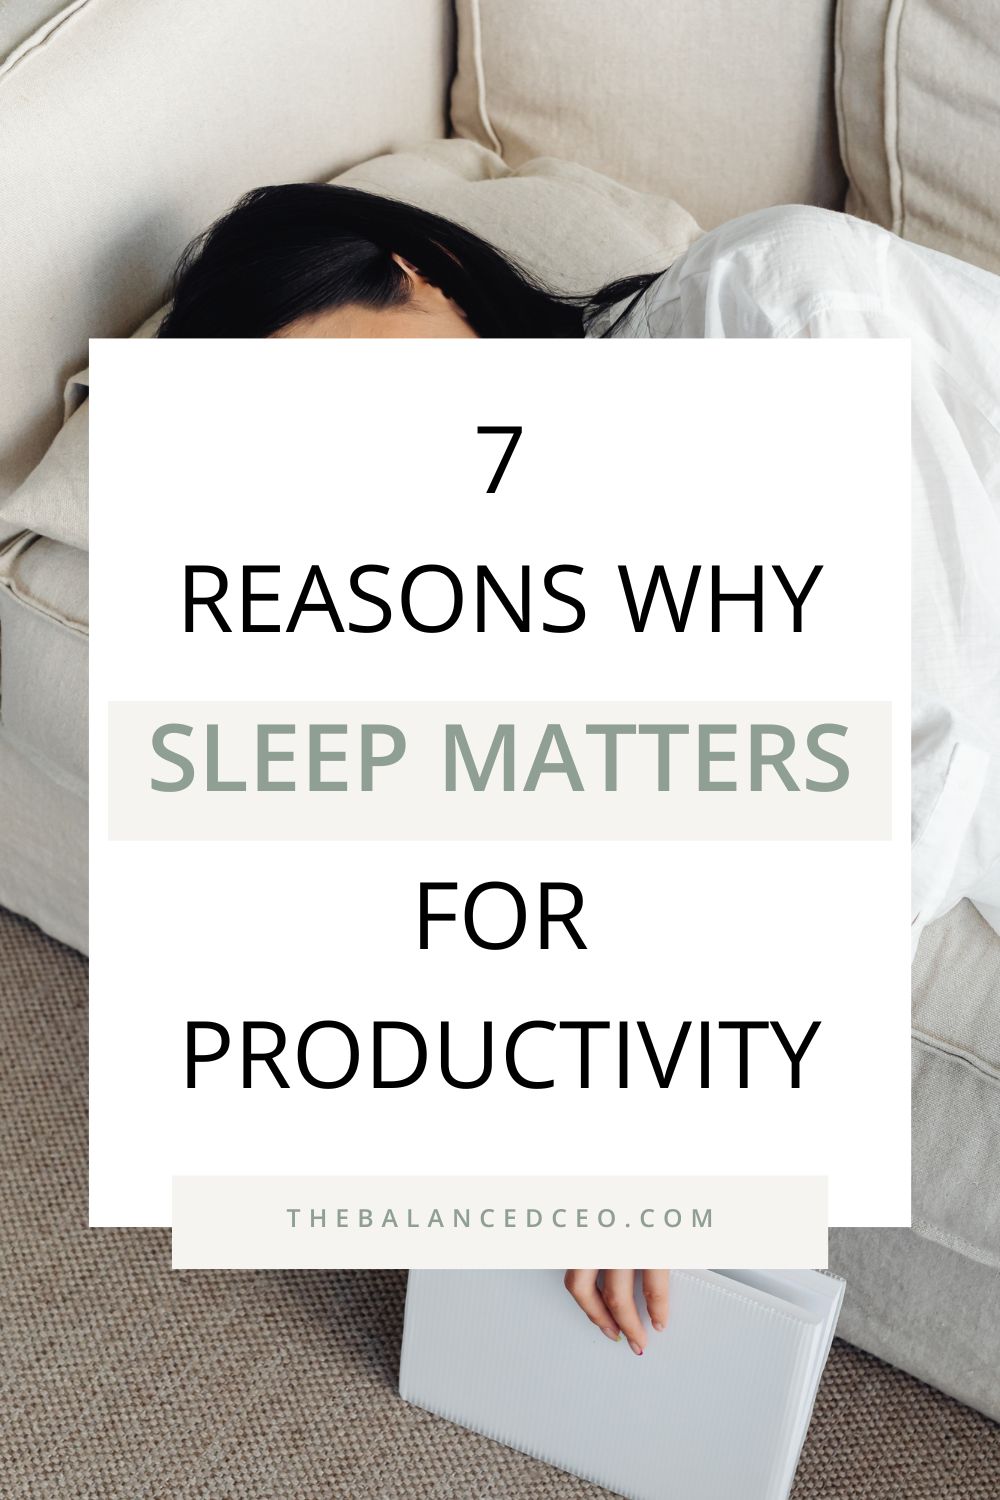 7 Reasons Why Sleep Matters for Productivity